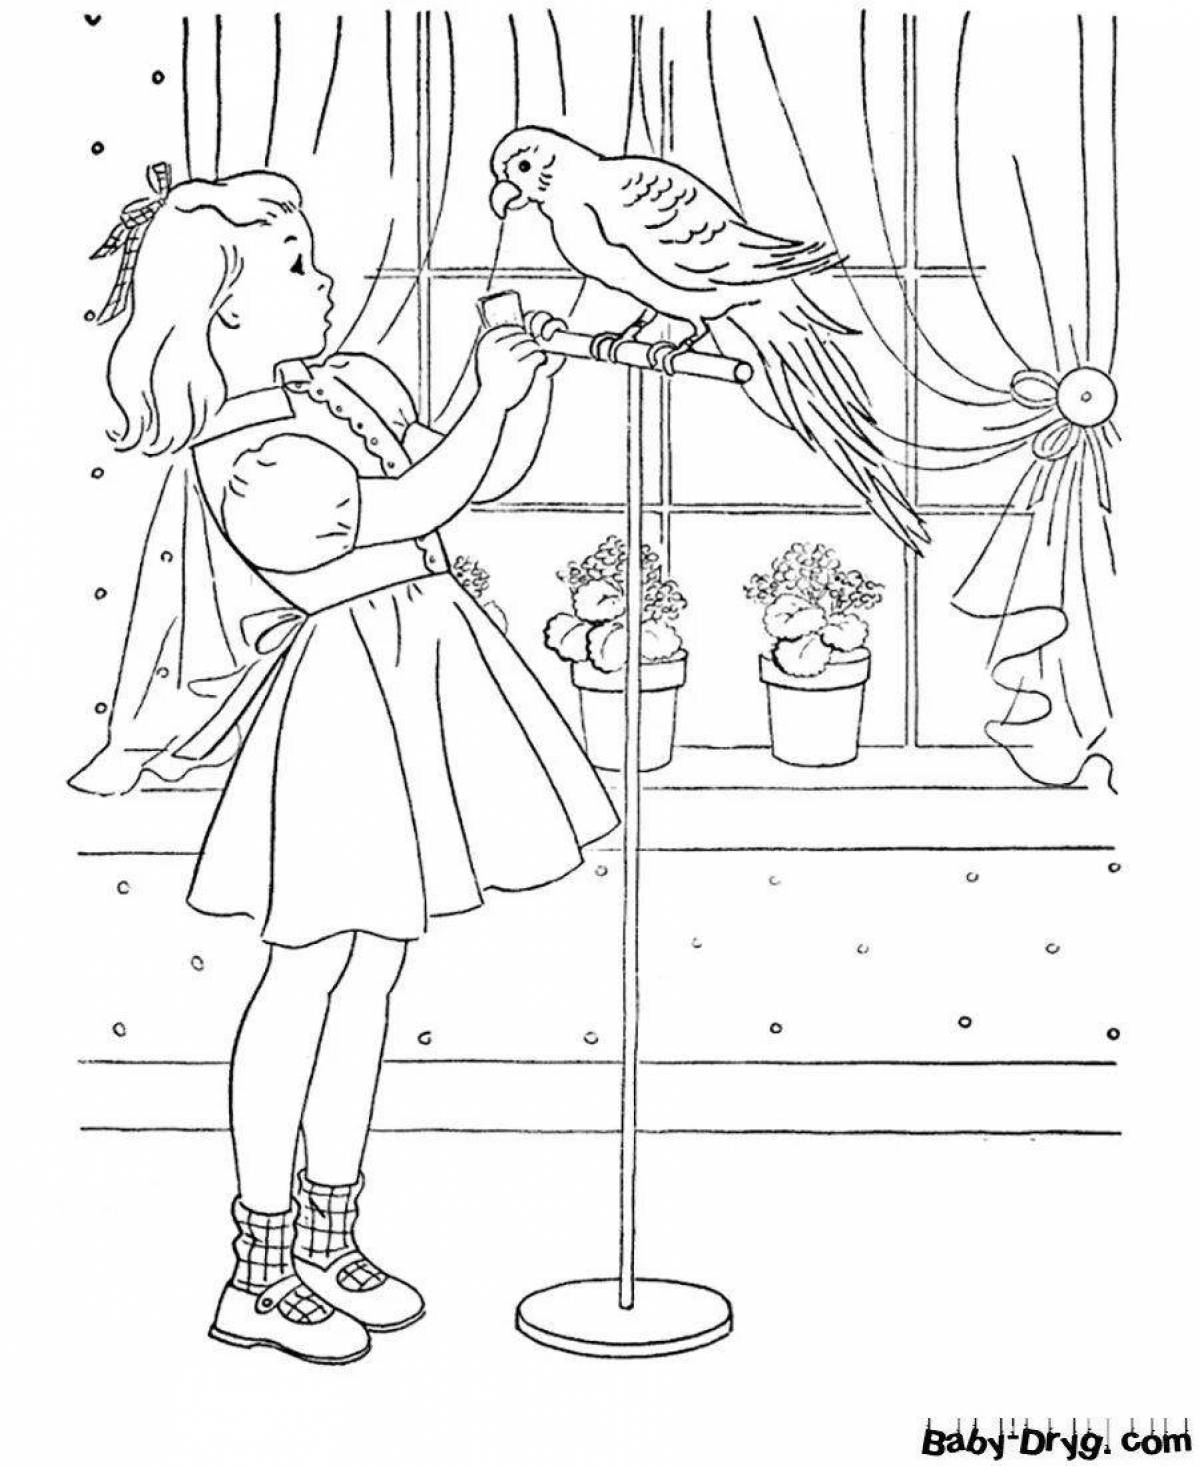 Coloring page dazzling disheveled sparrow